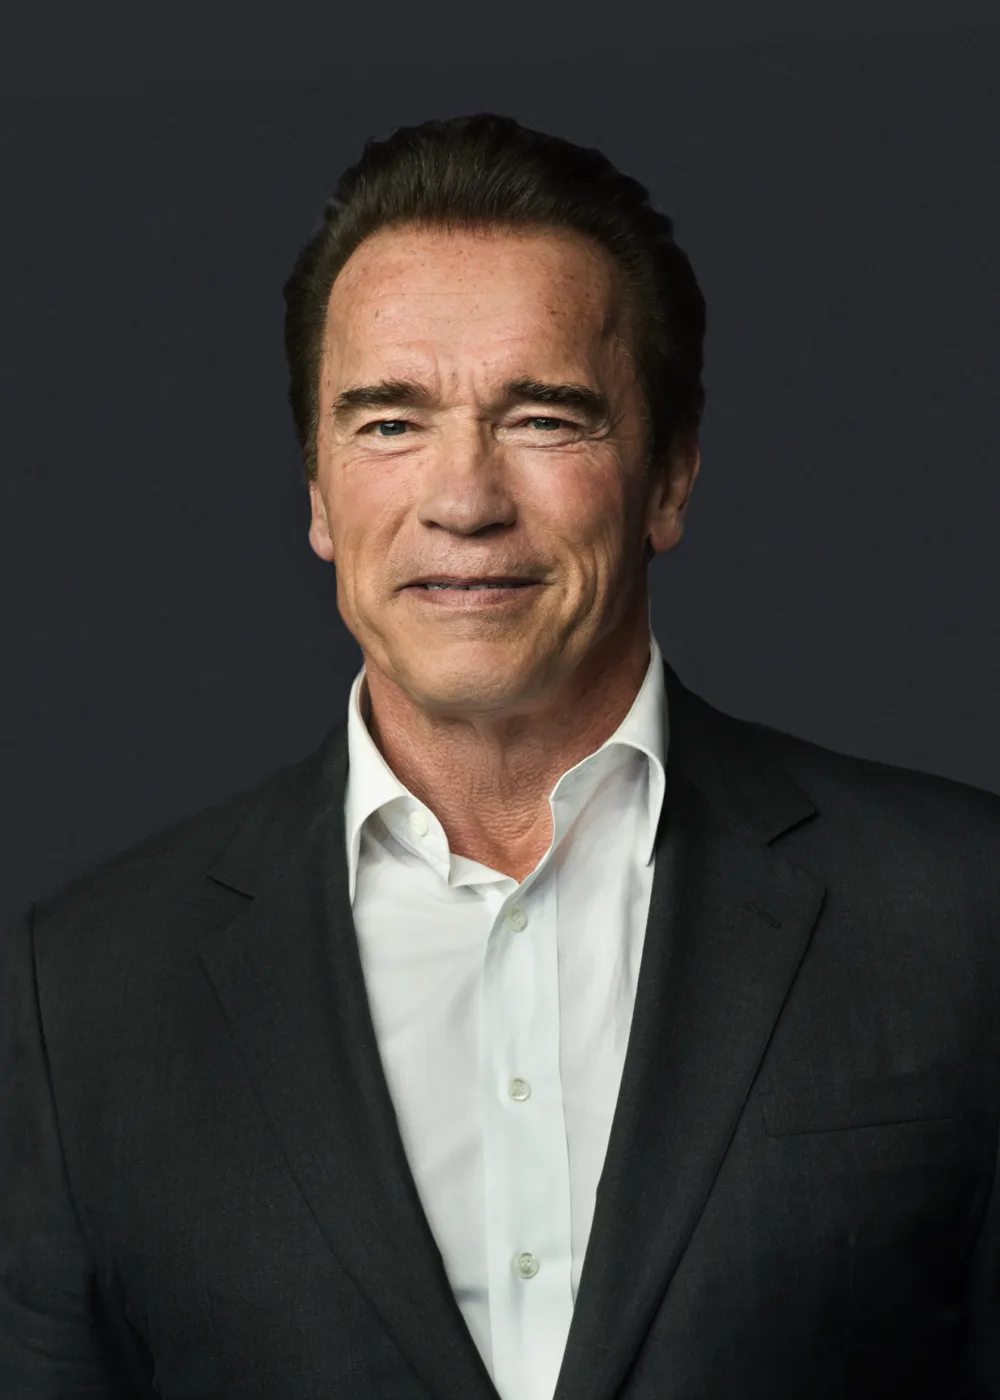 Arnold Schwarzenegger is an Austrian-American actor, filmmaker, businessman, and former professional bodybuilder. Born on July 30, 1947, in Thal, Austria, Schwarzenegger rose to fame in the 1970s and 1980s as a bodybuilder, winning numerous competitions including Mr. Olympia seven times. Schwarzenegger's success in bodybuilding led to a career in Hollywood, where he starred in a number of blockbuster action films, including The Terminator series, Predator, and Total Recall. He is also known for his roles in comedies like Twins and Kindergarten Cop. In addition to his film career, Schwarzenegger has been active in politics, serving as the Governor of California from 2003 to 2011. He has also been a philanthropist, supporting a variety of causes including after-school programs, health initiatives, and environmental conservation efforts. With his iconic physique, distinctive accent, and larger-than-life personality, Schwarzenegger has become a cultural icon, known for his achievements in both the entertainment industry and the world of sports, as well as his dedication to public service and philanthropy.